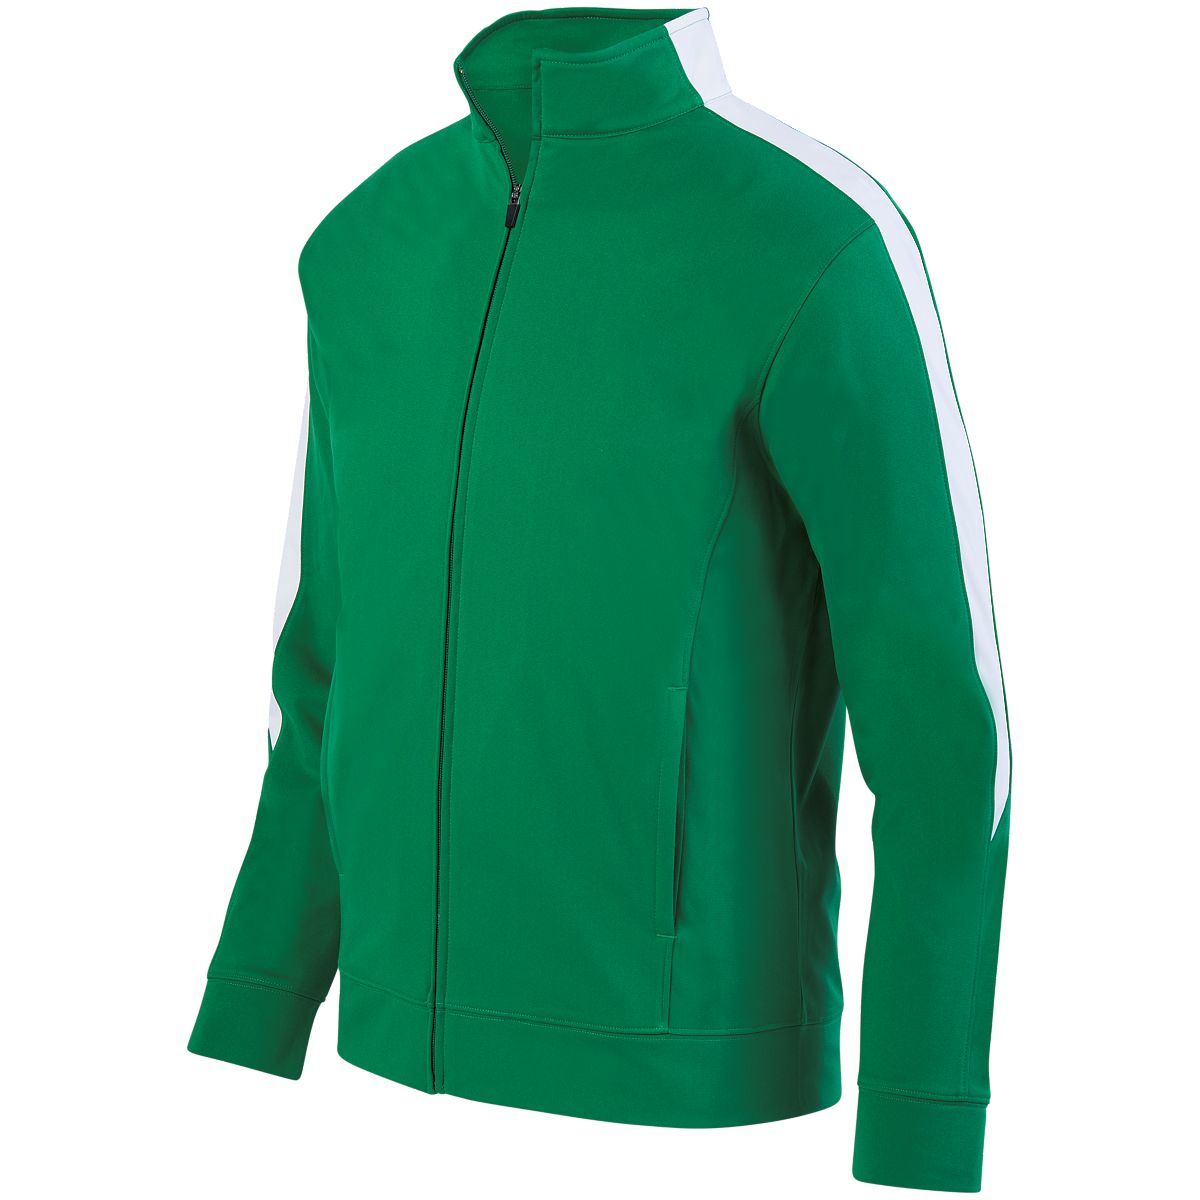 Augusta Sportswear Medalist Jacket 2.0 in Kelly/White  -Part of the Adult, Adult-Jacket, Augusta-Products, Outerwear product lines at KanaleyCreations.com